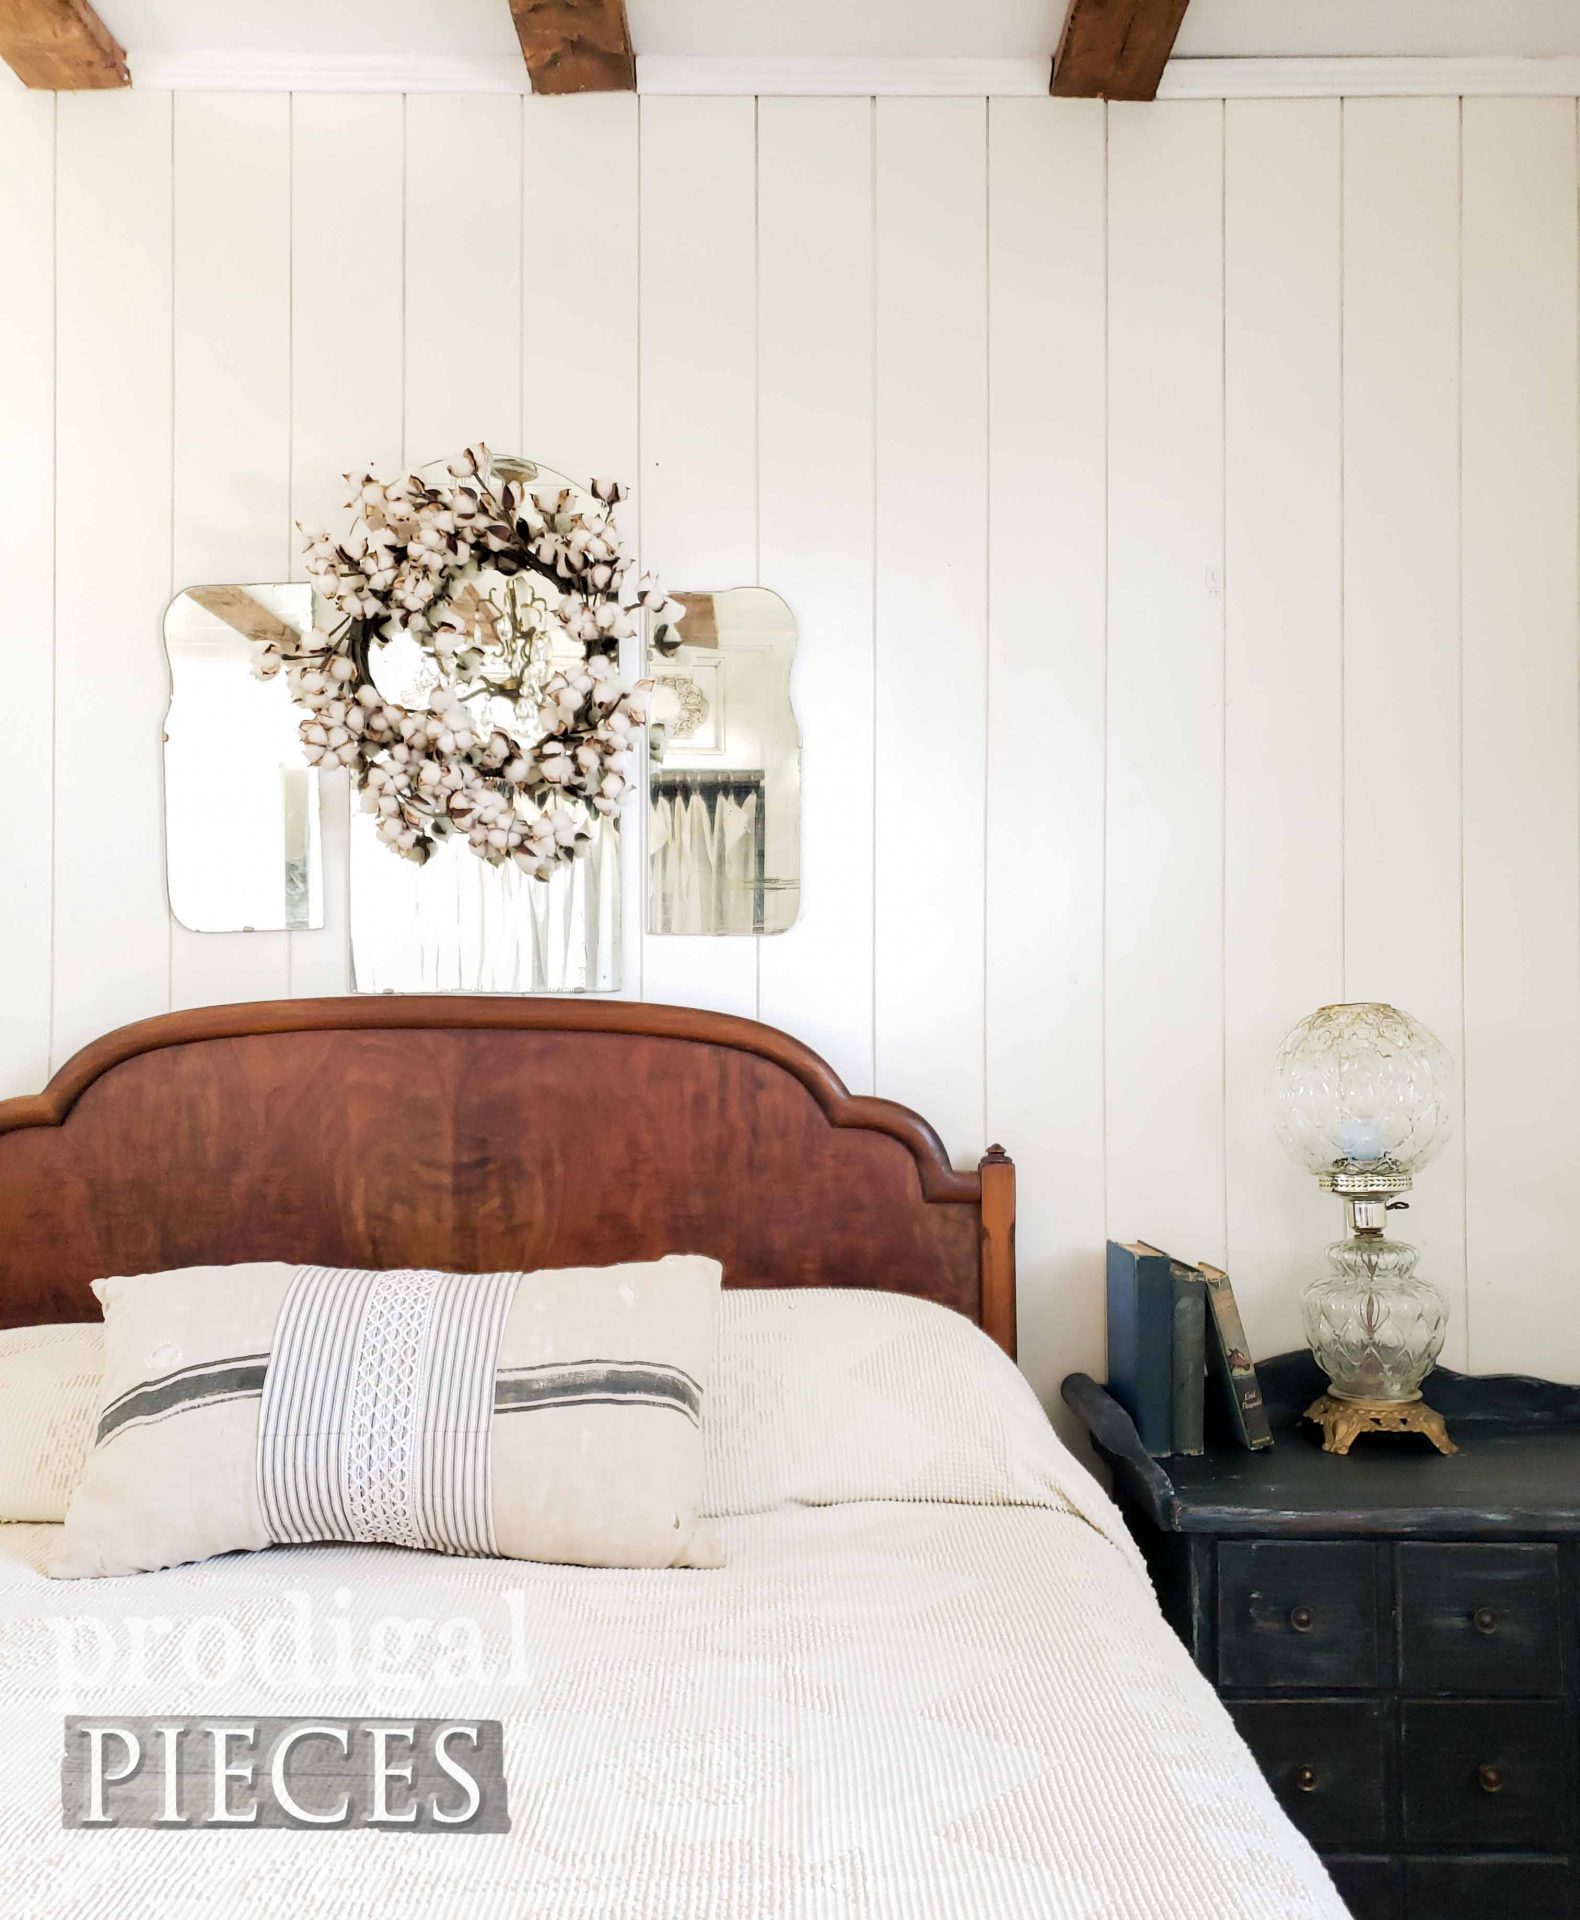 Cozy Farmhouse Bedroom Decor with Chest Nightstand by Larissa of Prodigal Pieces | prodigalpieces.com #prodigalpieces #home #farmhouse #bedroom #homedecor #diy